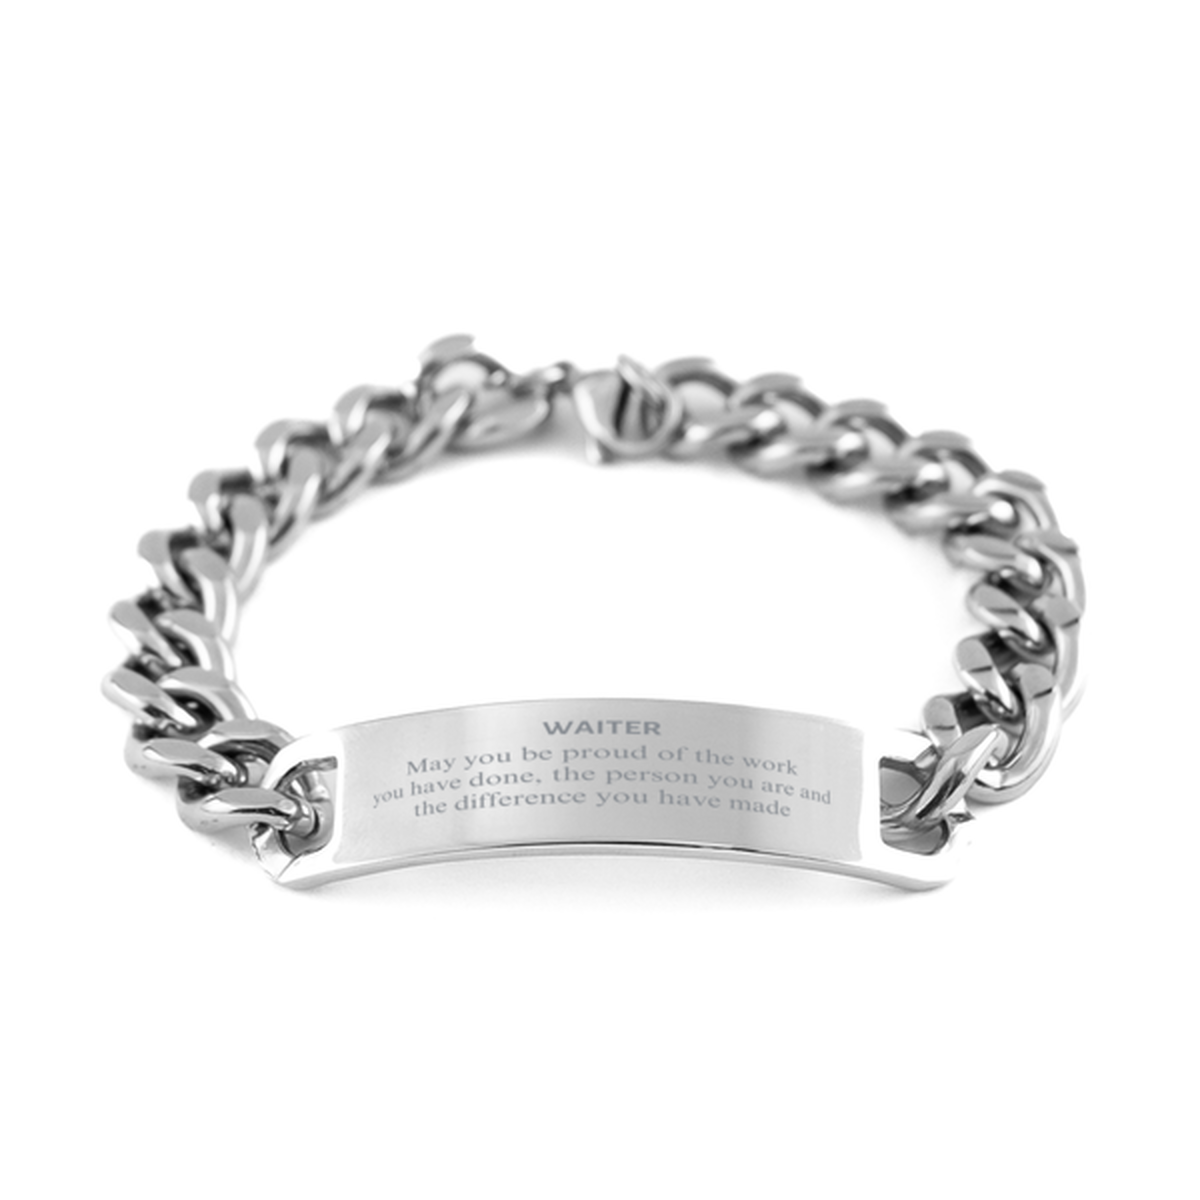 Waiter May you be proud of the work you have done, Retirement Waiter Cuban Chain Stainless Steel Bracelet for Colleague Appreciation Gifts Amazing for Waiter